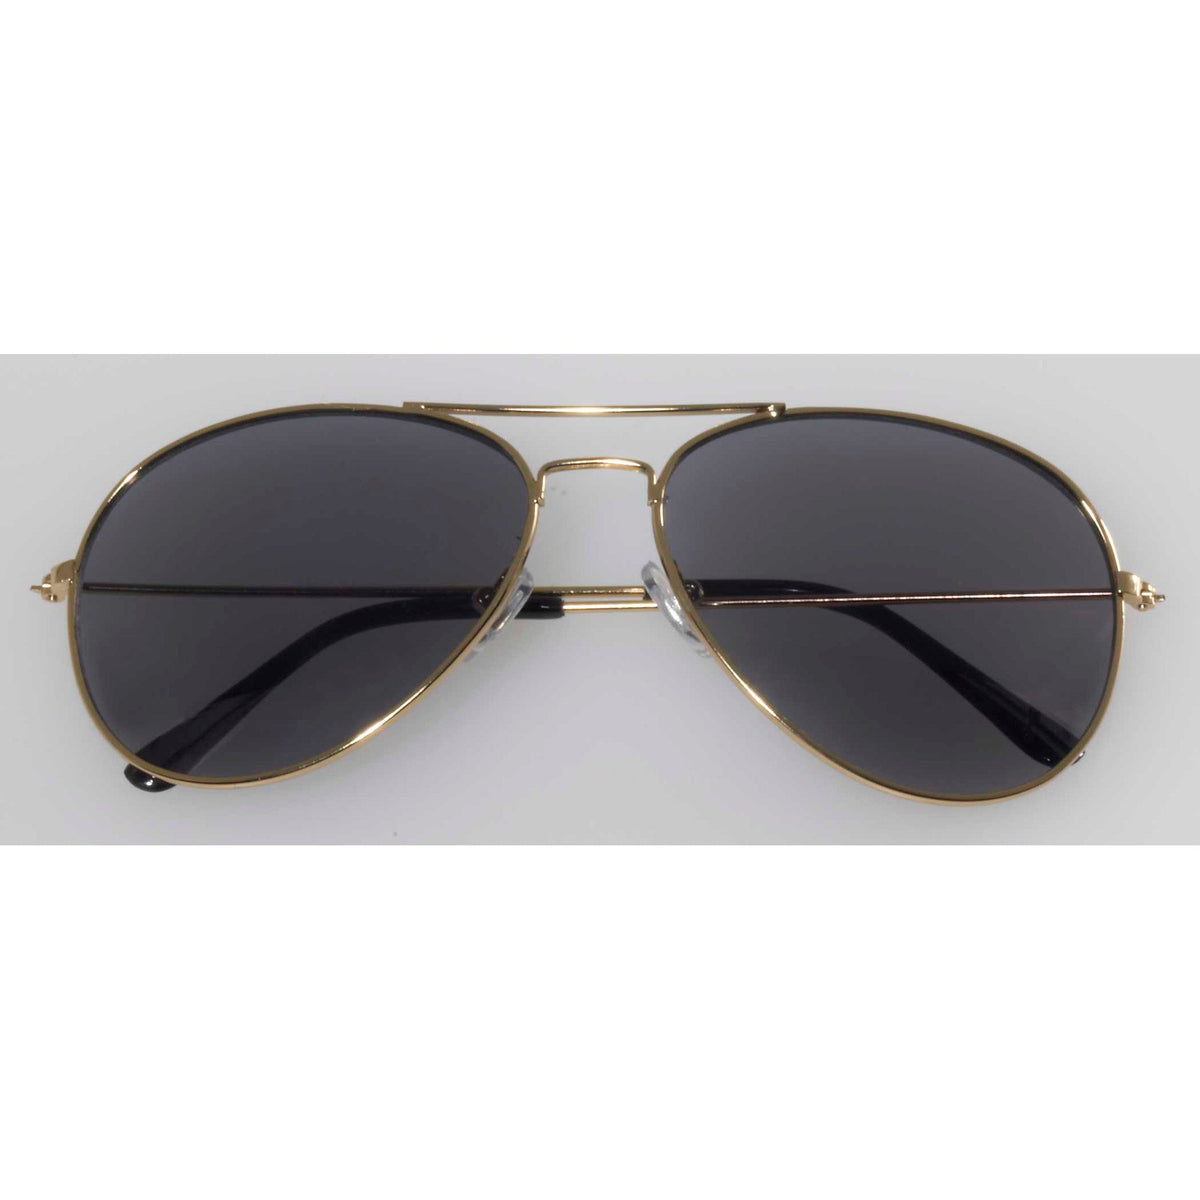 RUBIES II (Ruby Slipper Sales) Costume Accessories Aviator Gold Glasses for Adults 721773652257